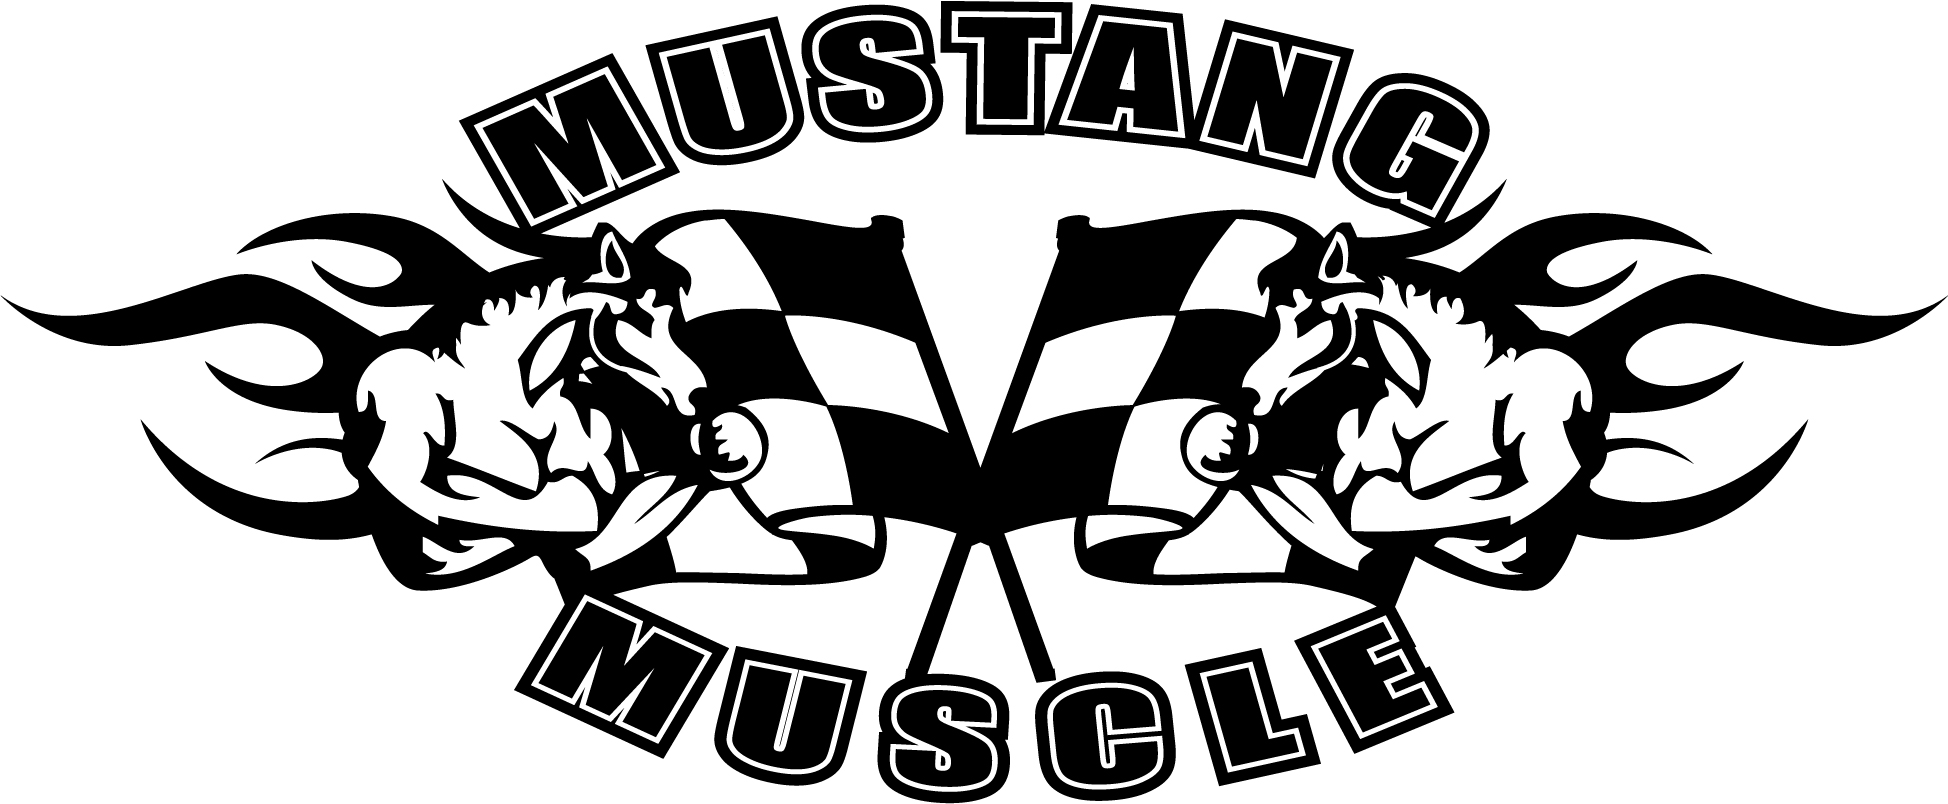 Mustang Muscle